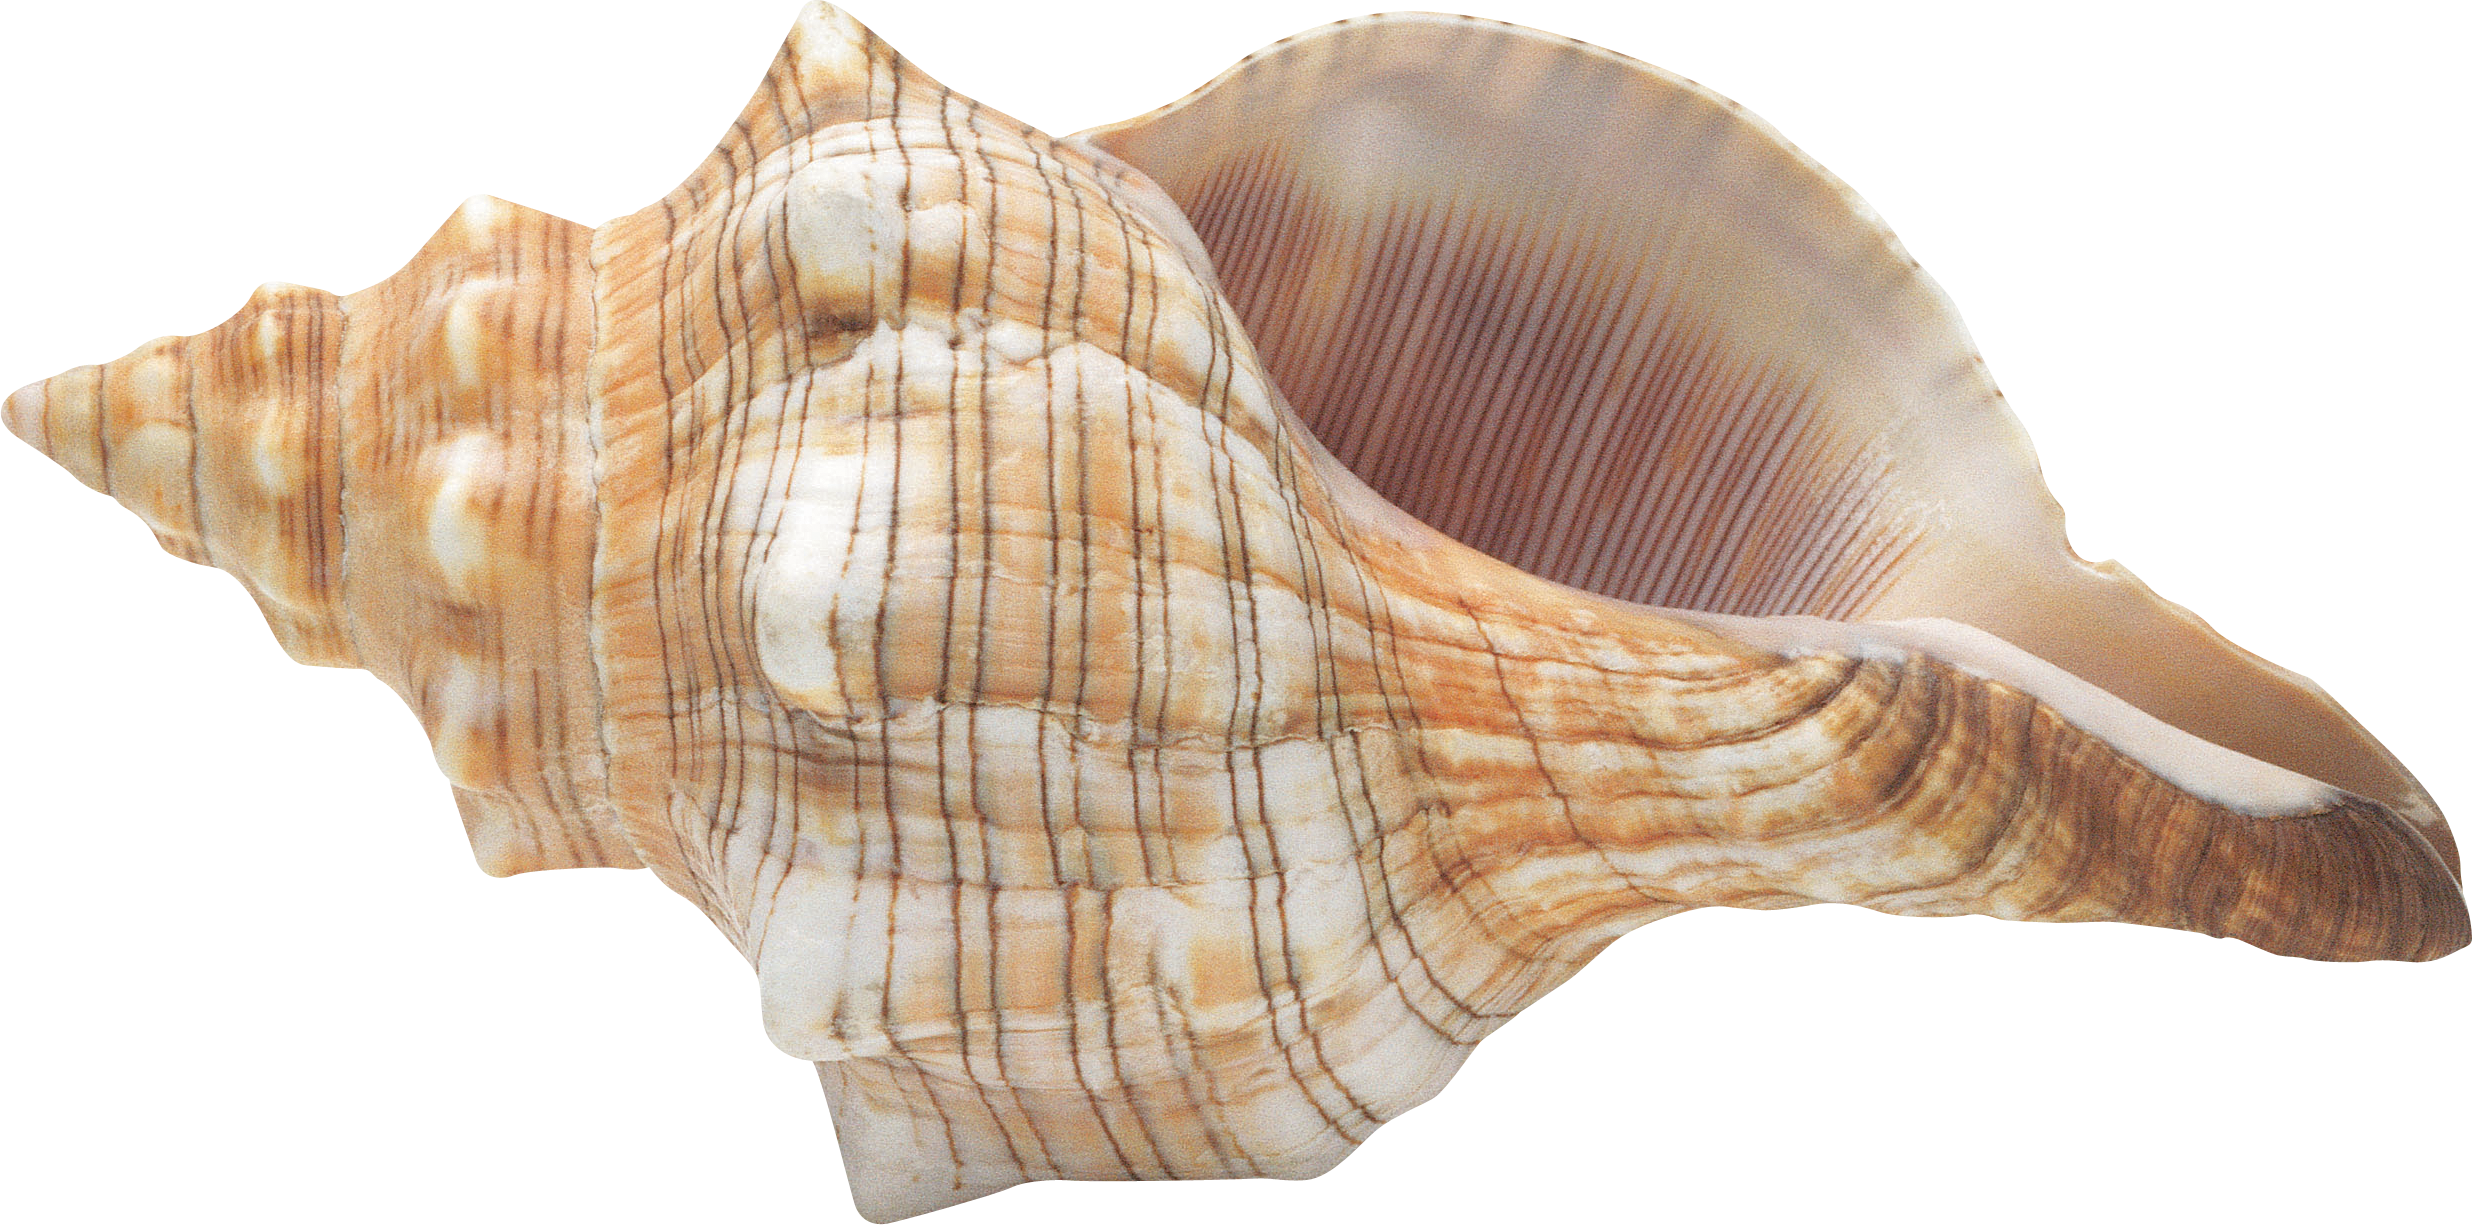 Seashell Conch PNG Beeld achtergrond